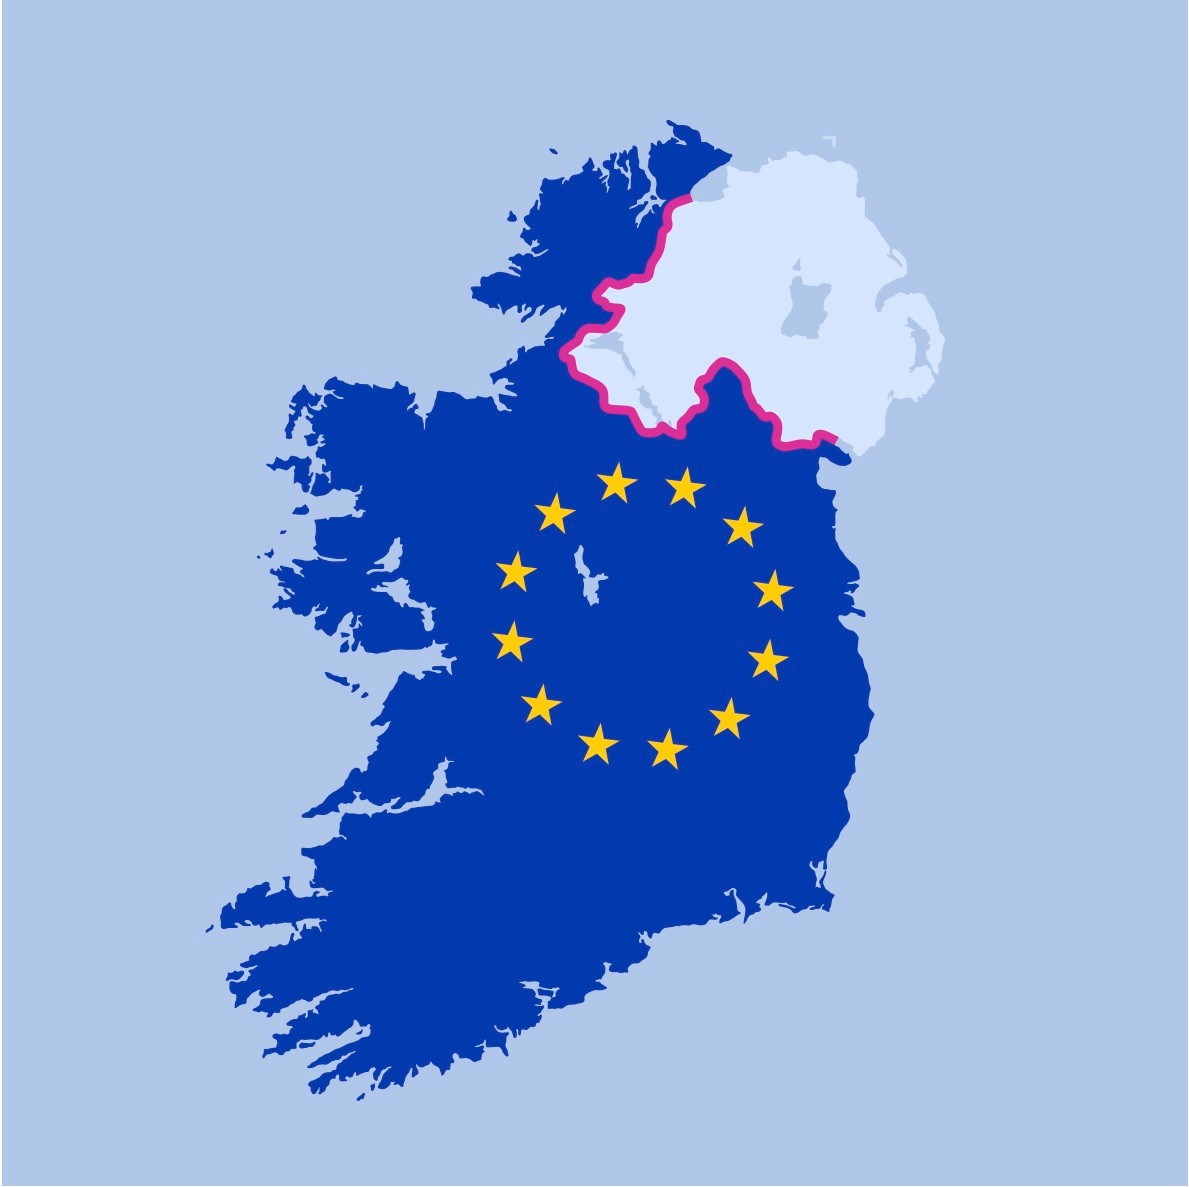 Red tape and Northern Ireland and Ireland part of the European Union